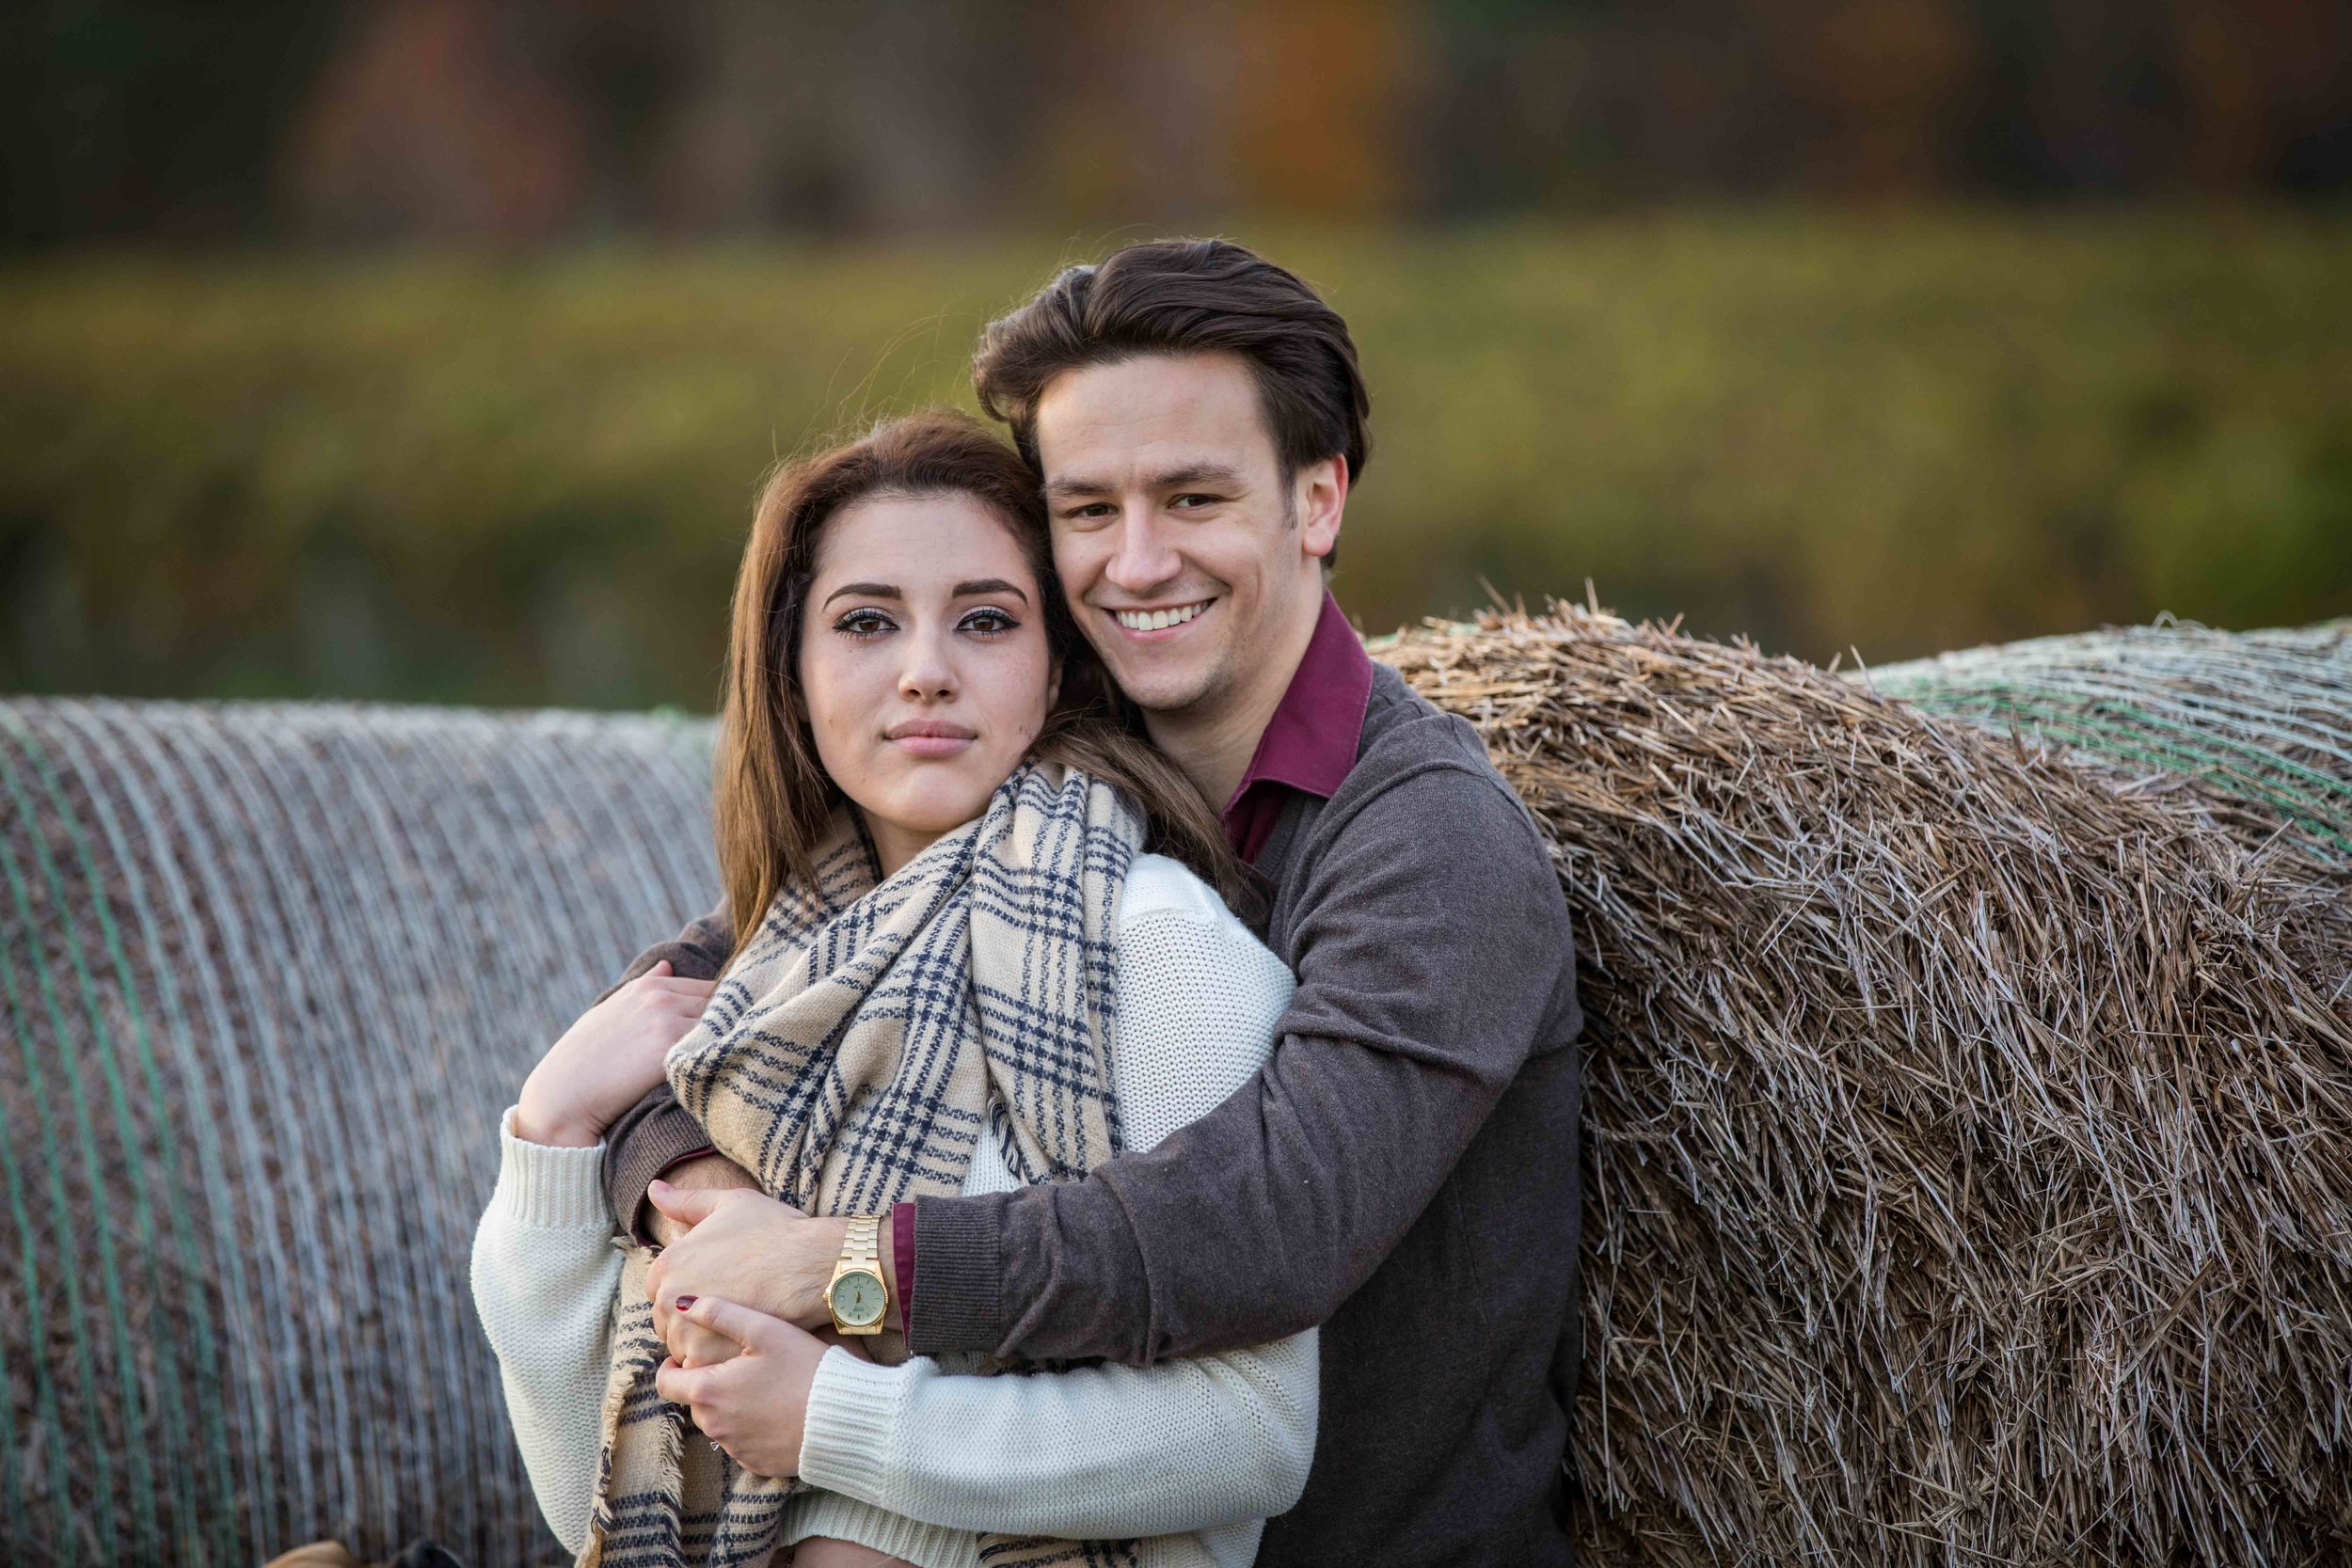  couple leaning on hay bale  